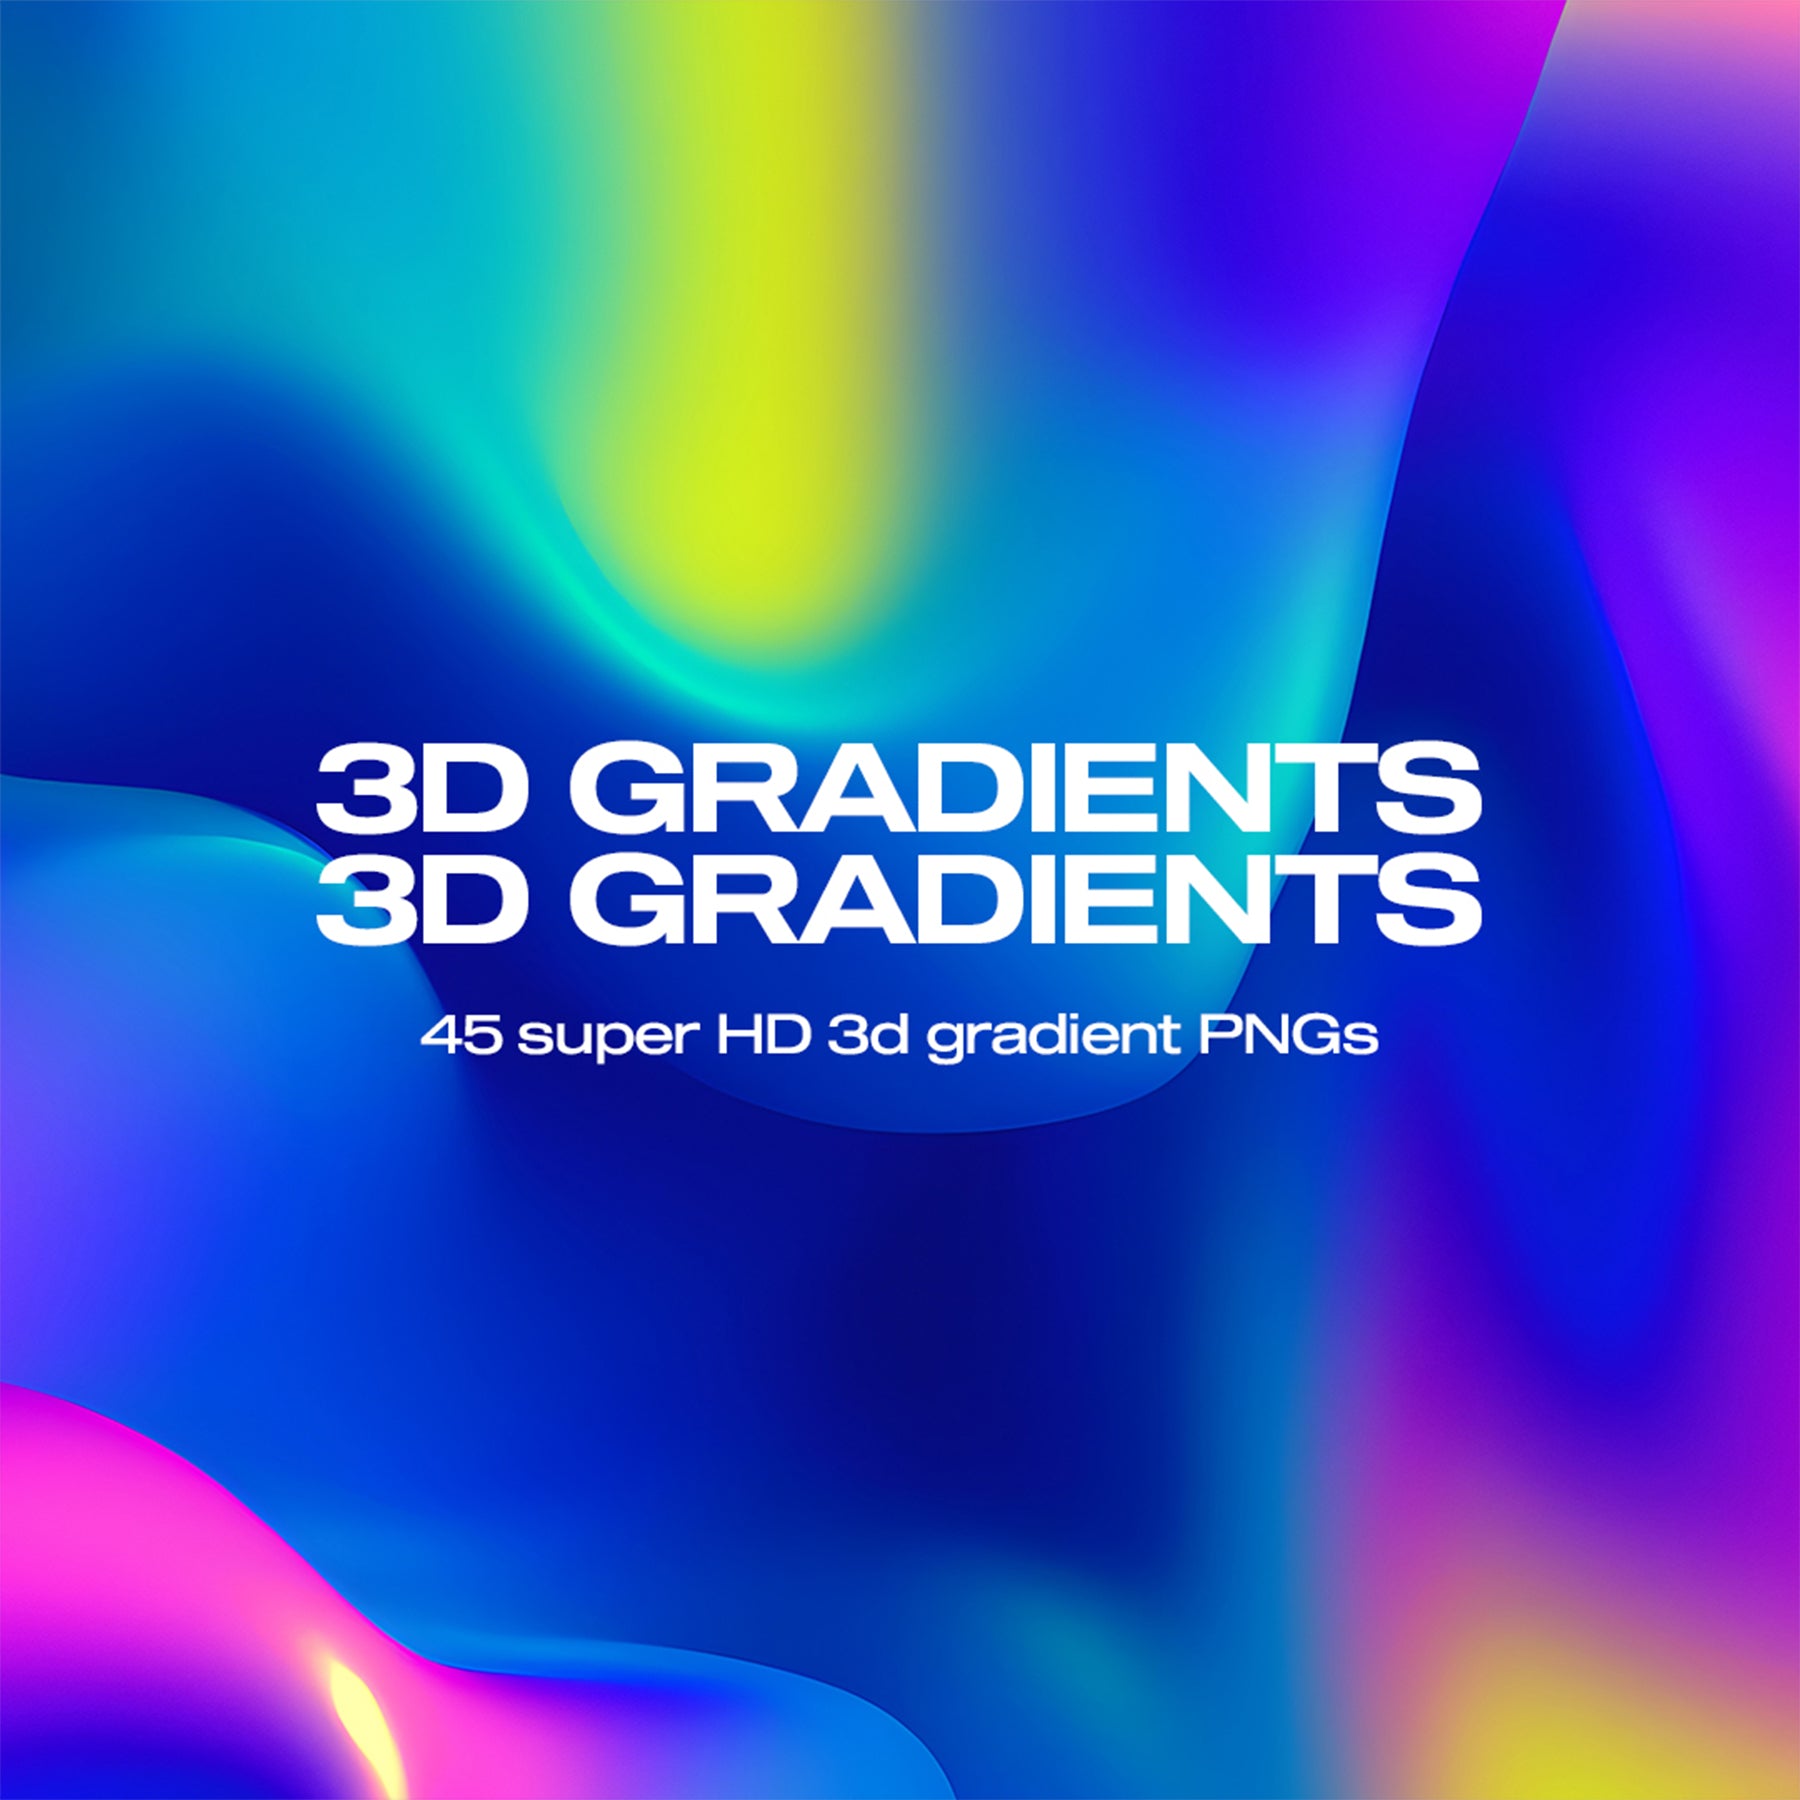 A bright flowing gradient behind text that reads "3D Gradients" "45 Super HD  3d gradient PNGs".